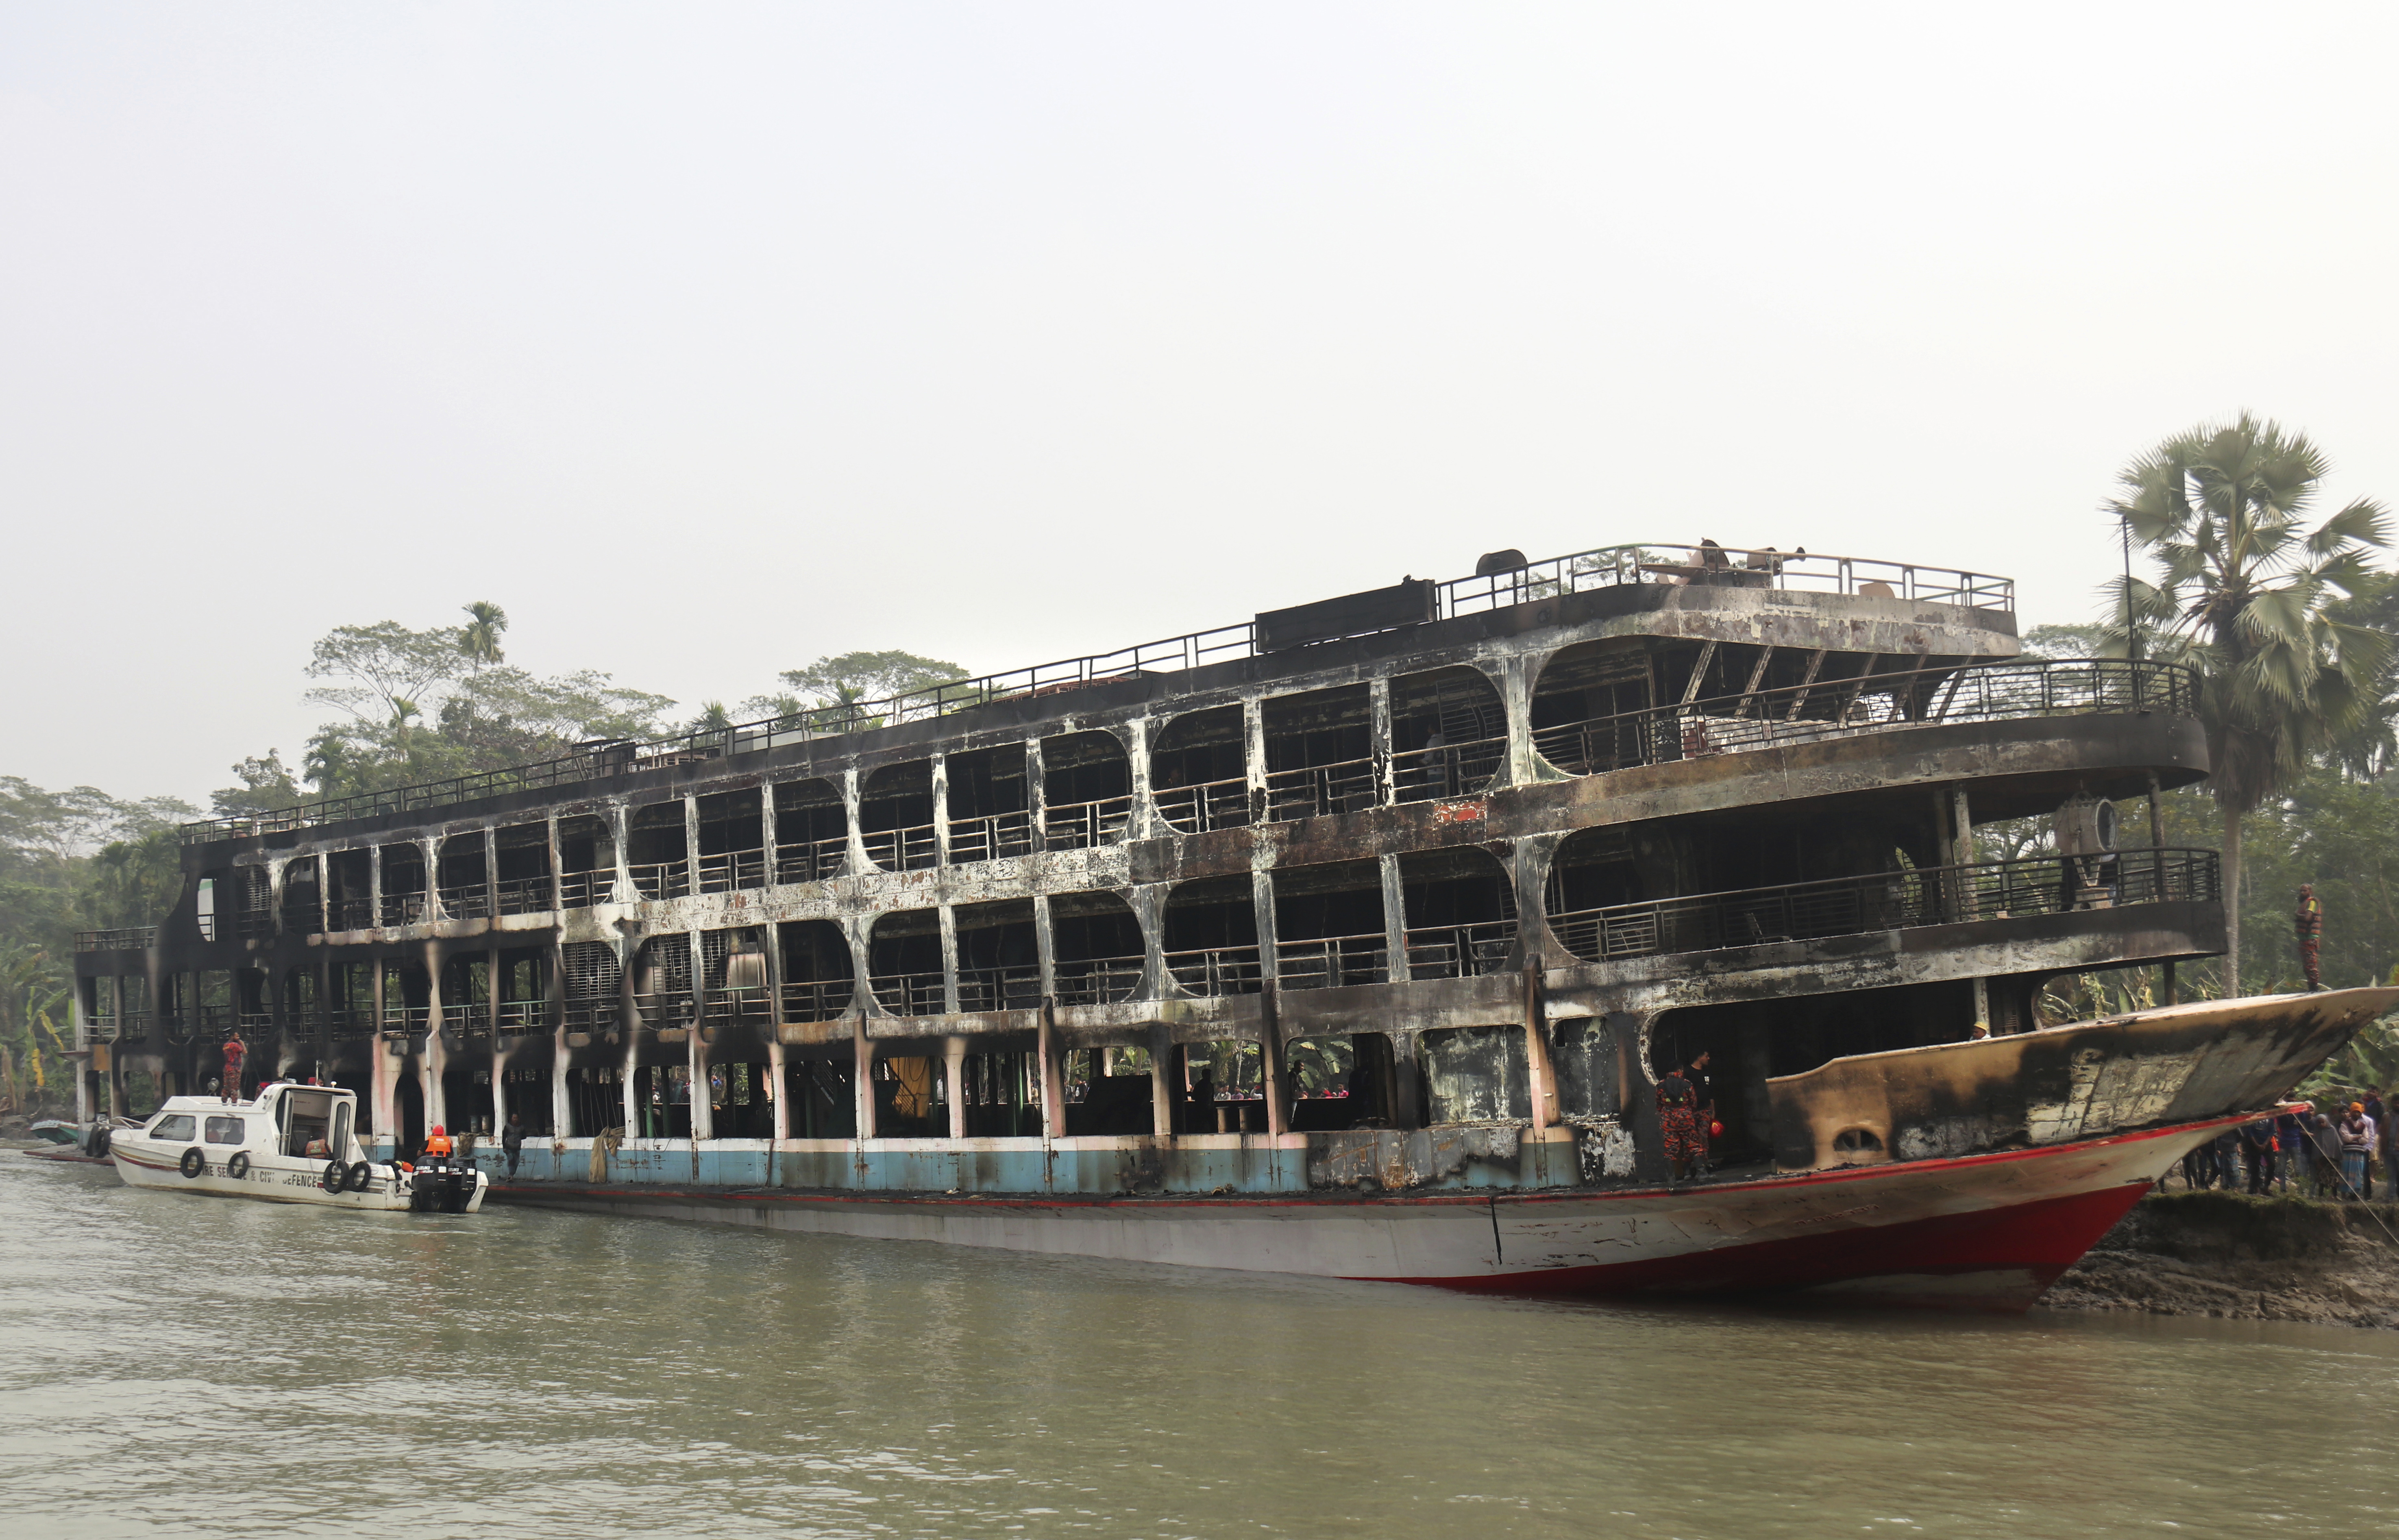 At least 39 dead after ferry fire forces escape to frigid Bangladesh
river